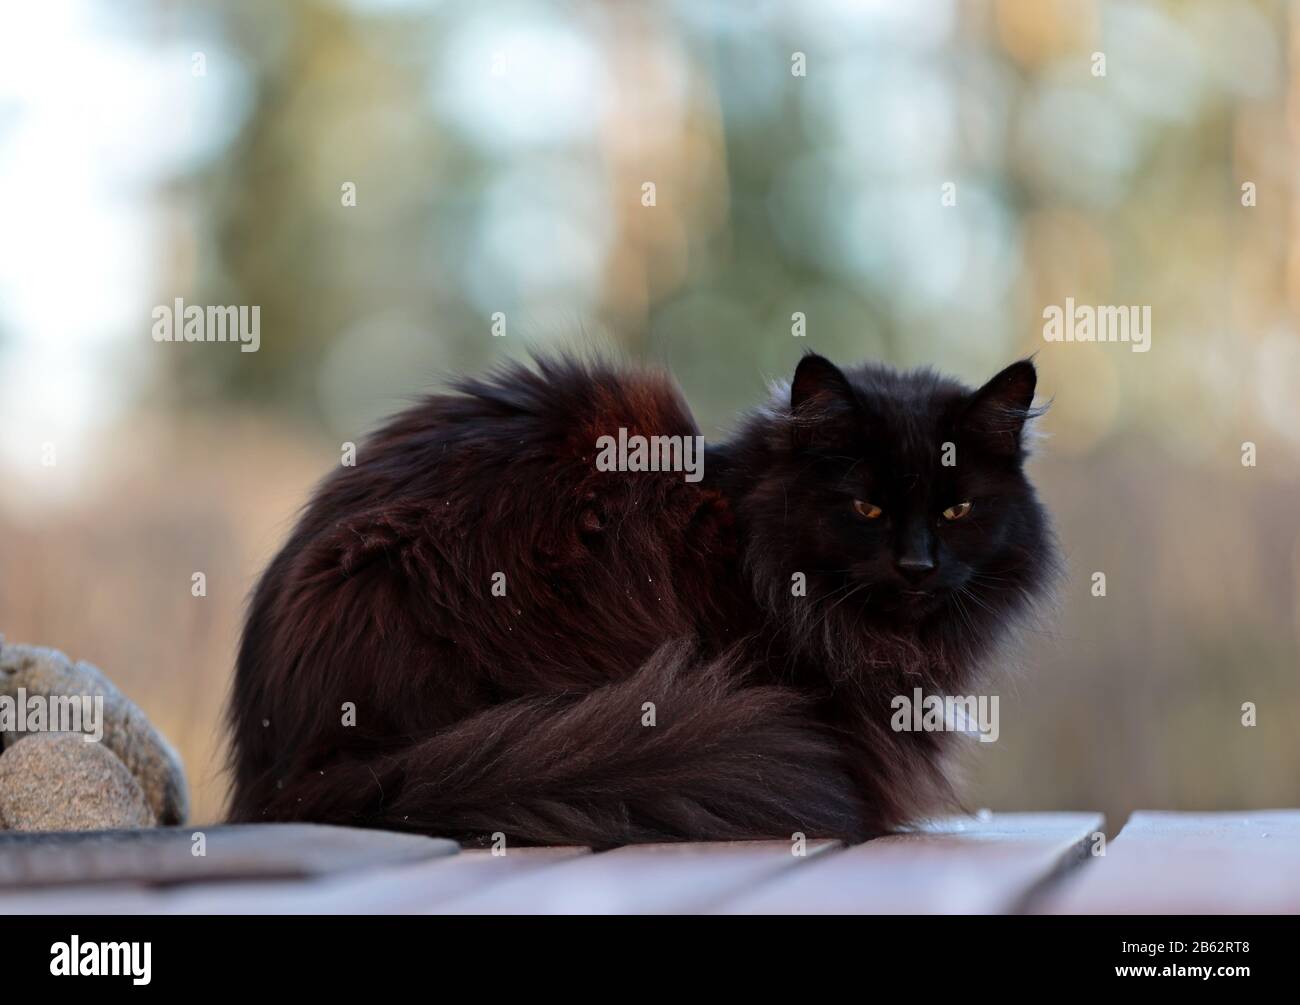 A beautiful black norwegian forest cat sitting on wooden stairs outdoors Stock Photo